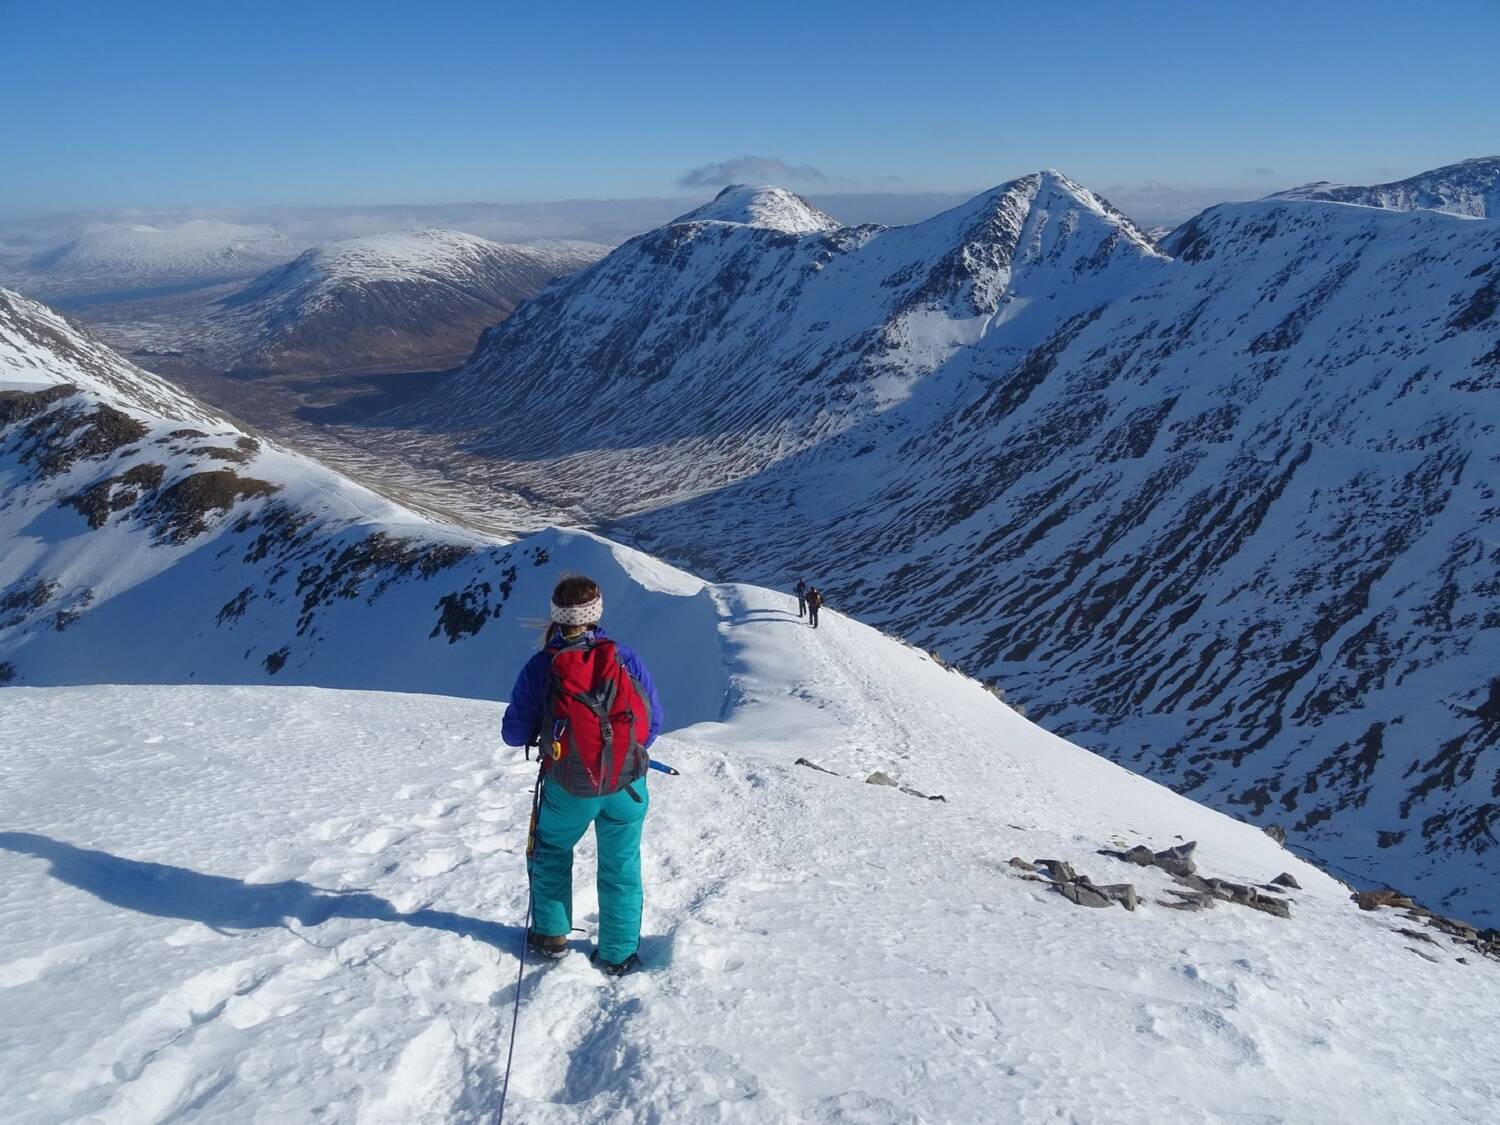 A woman dressed in full winter gear stands almost at the summit of a snow-covered mountain, looking down towards a ridge path, with the glen far below. The sky is bright blue and the snow is glistening.